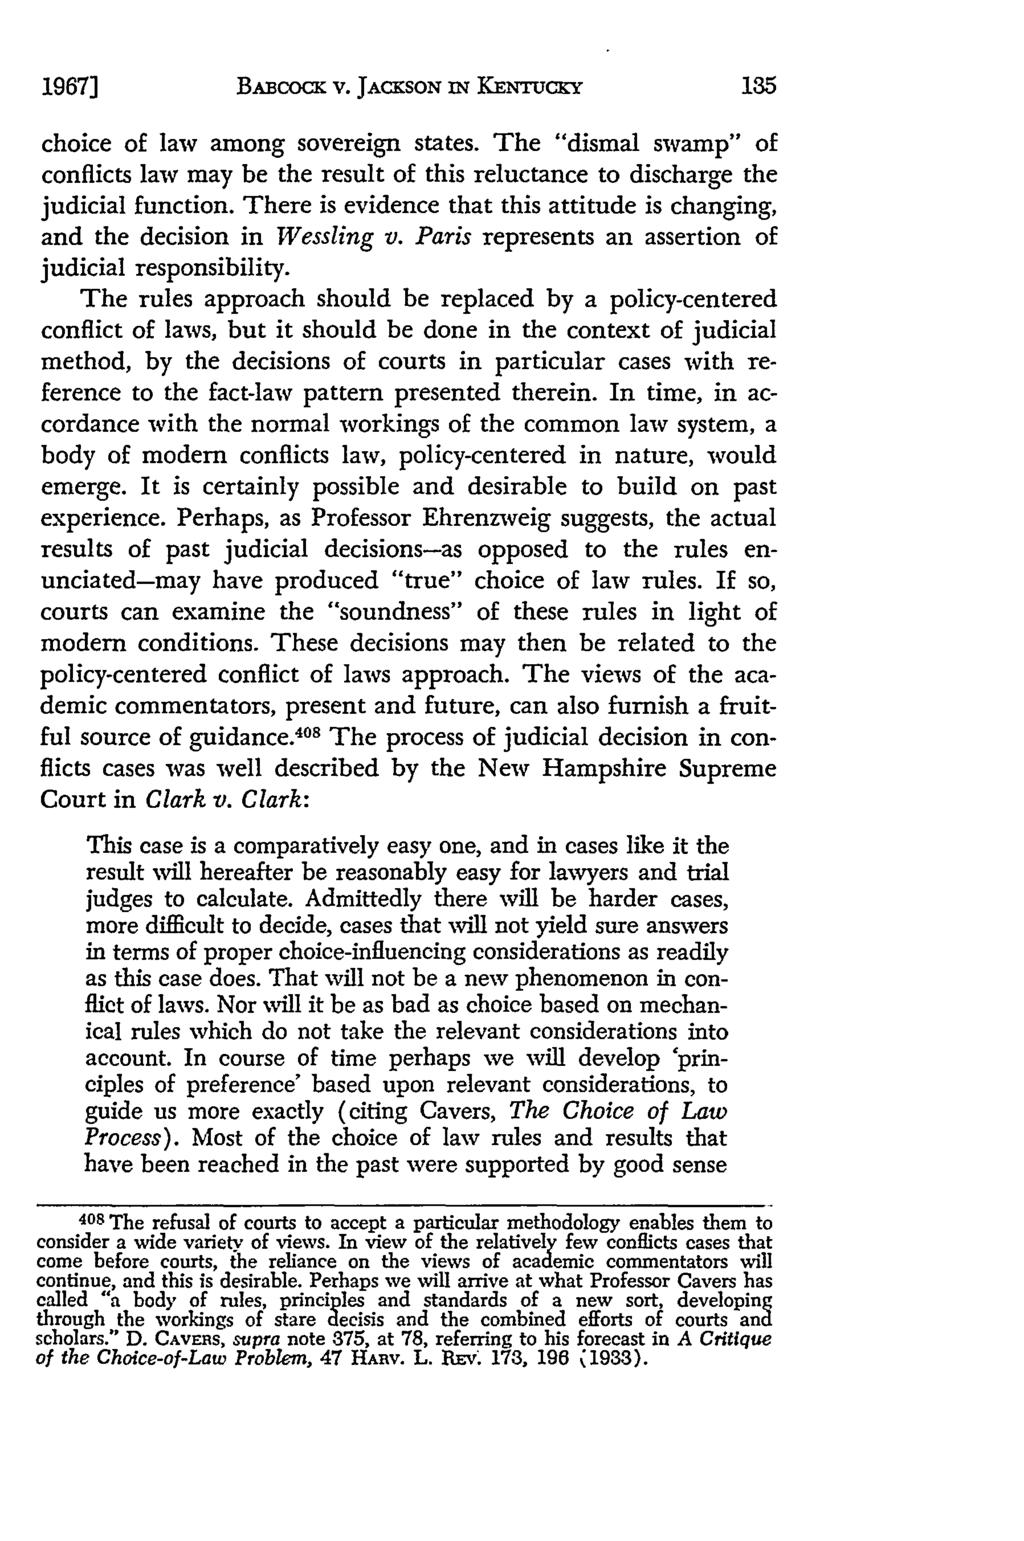 BABCOCK V. JACKSON IN KENTUCKY choice of law among sovereign states. The "dismal swamp" of conflicts law may be the result of this reluctance to discharge the judicial function.